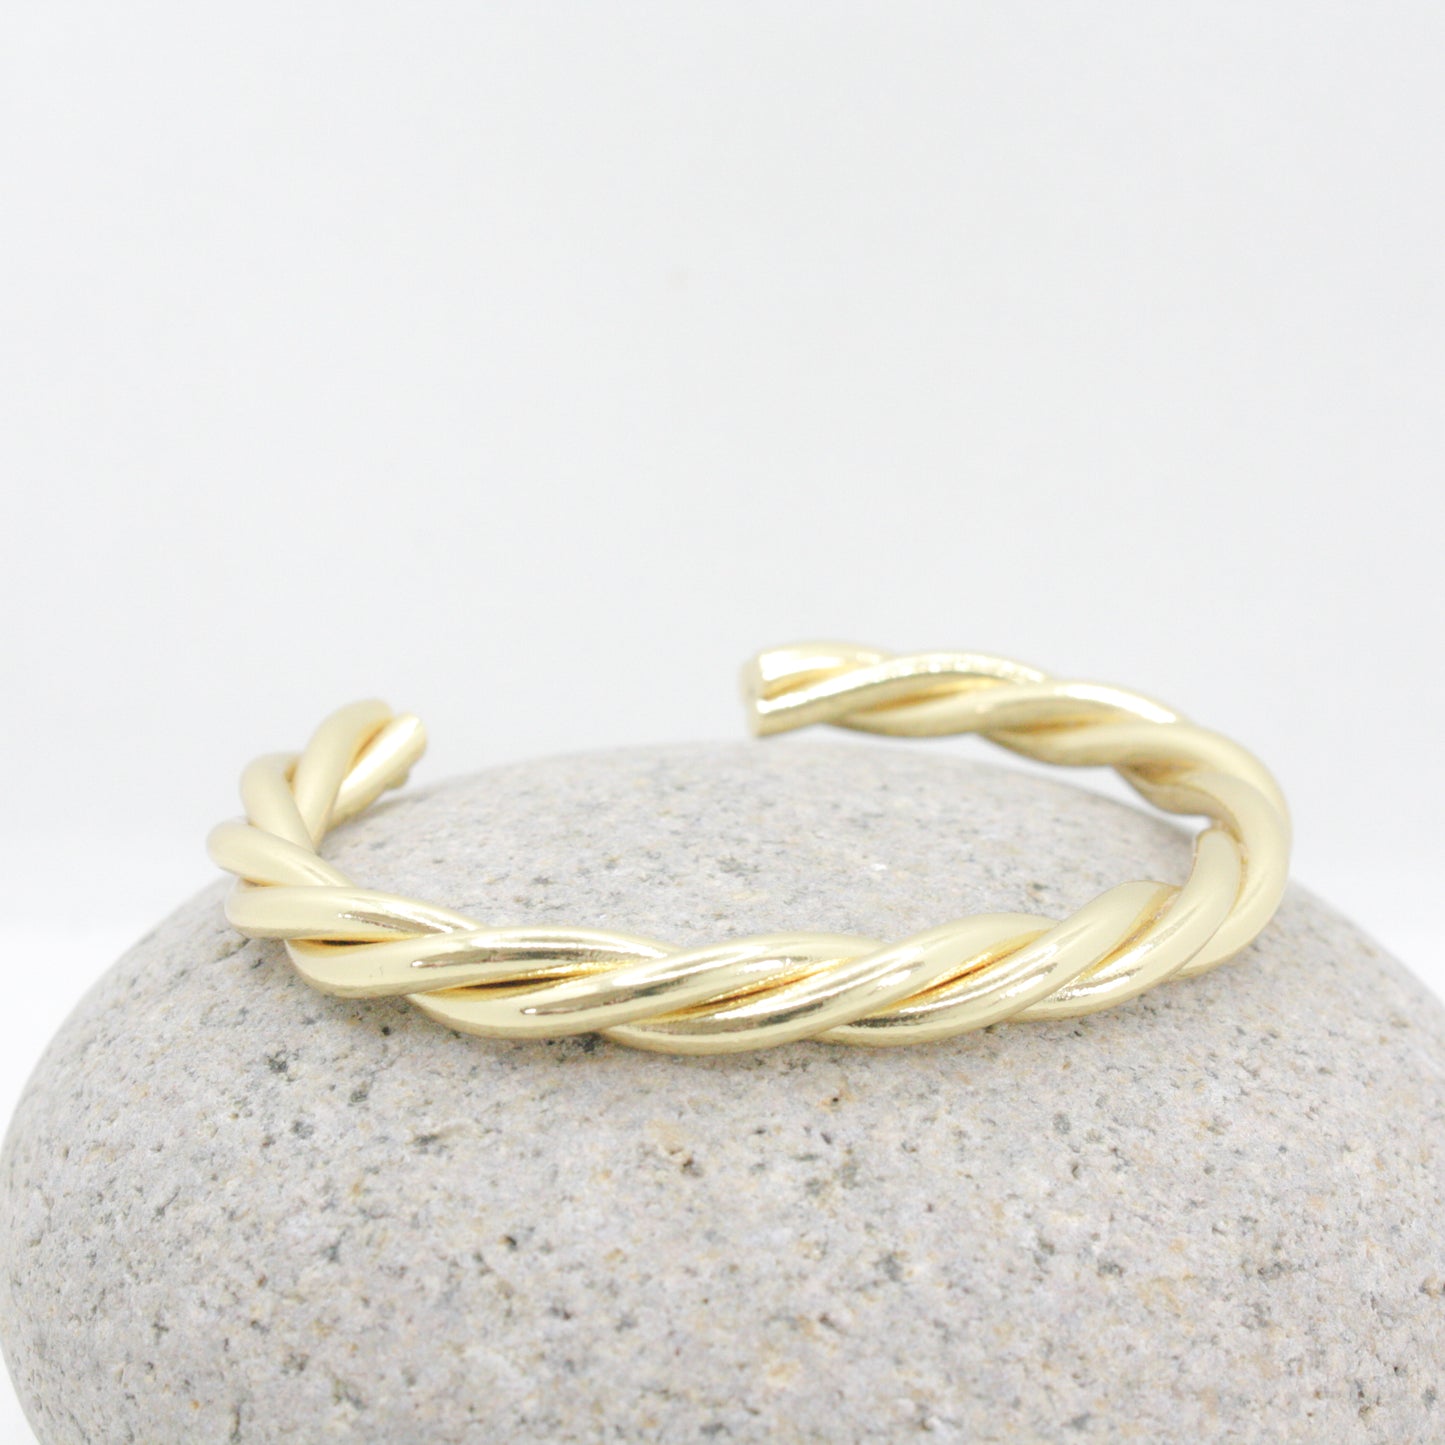 Twisted Rope Cuff Bracelet :: 24k Gold Filled